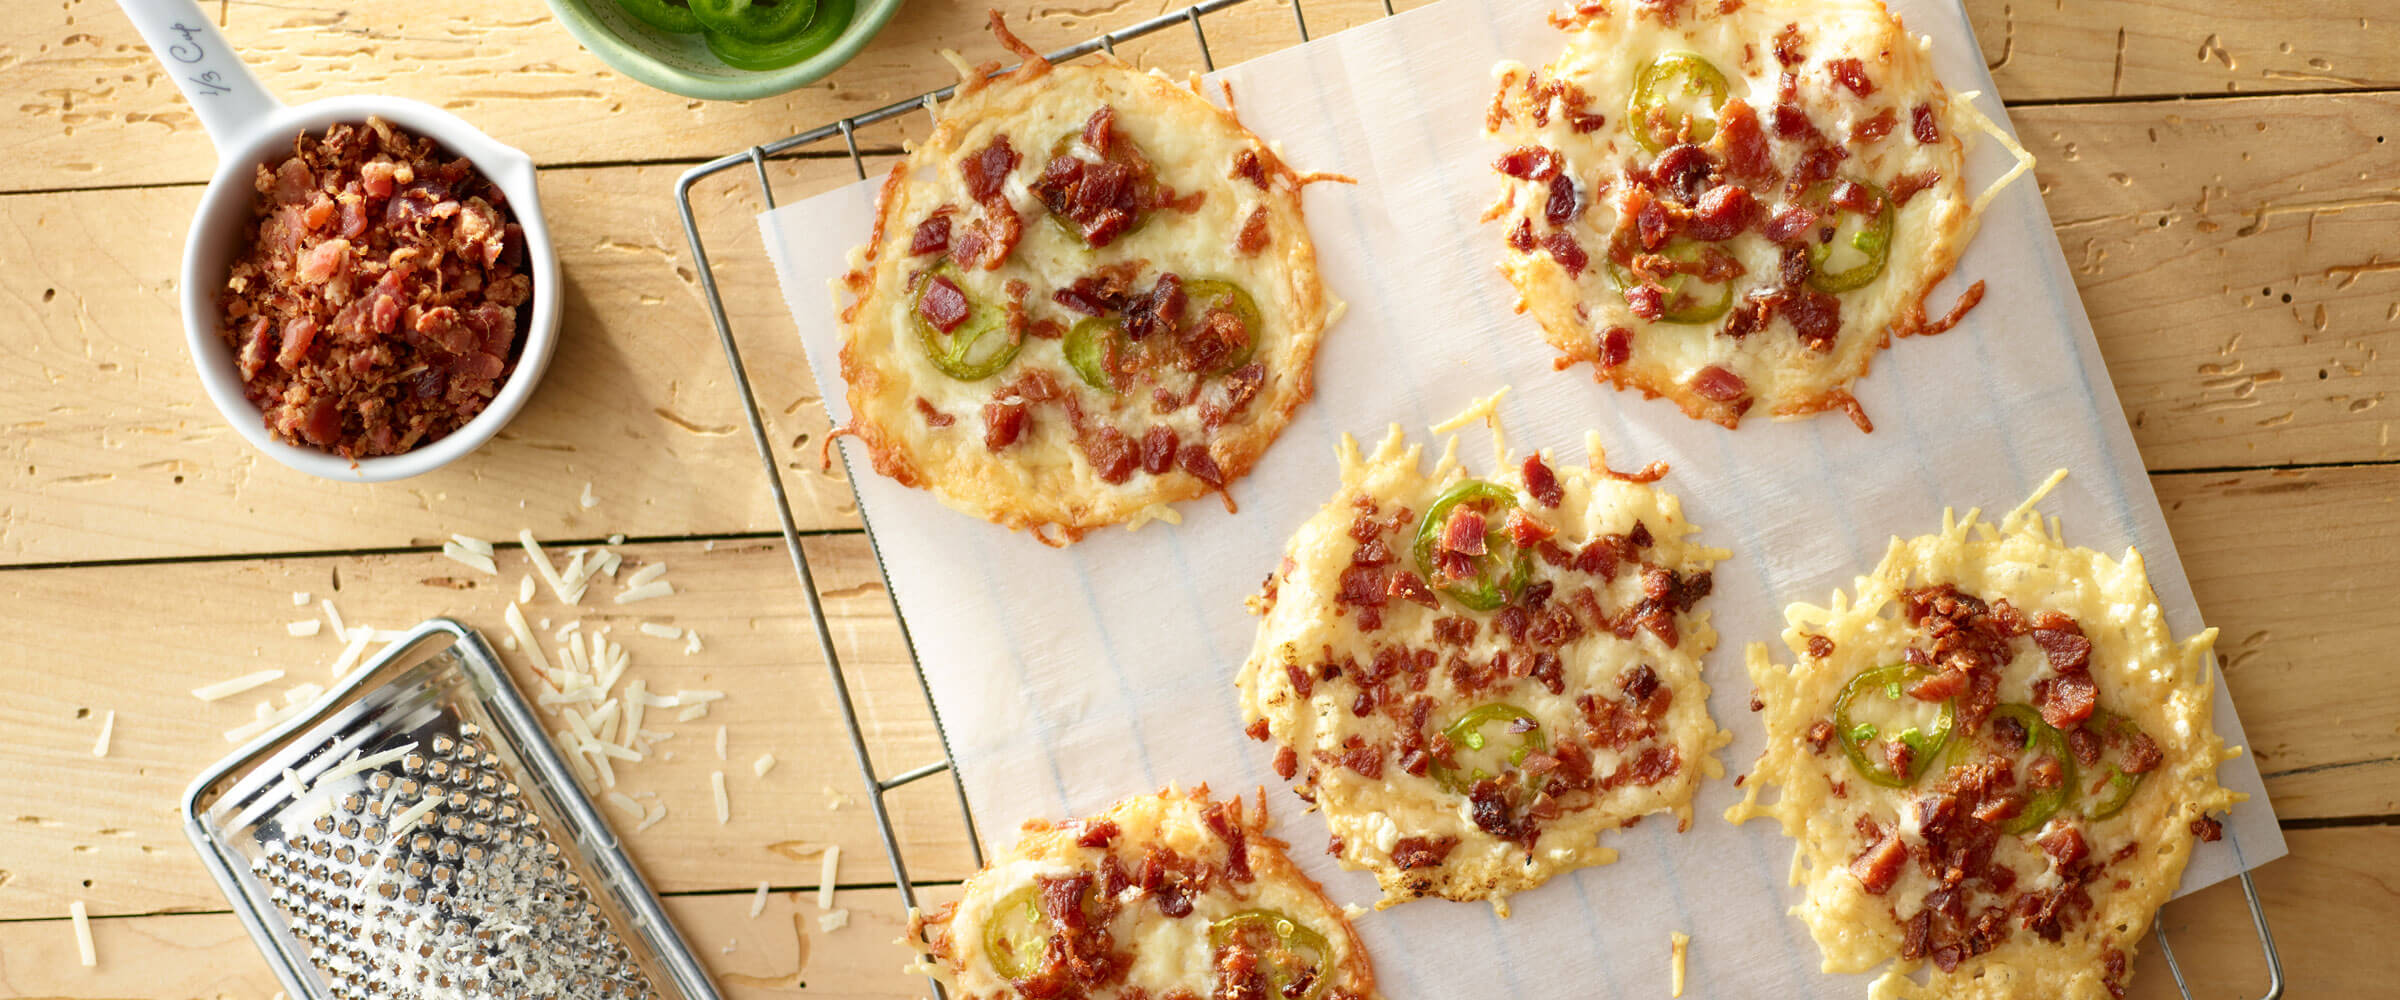 Cheese & Jalapeño Bacon Crisps on parchment paper with extra bacon bits on side